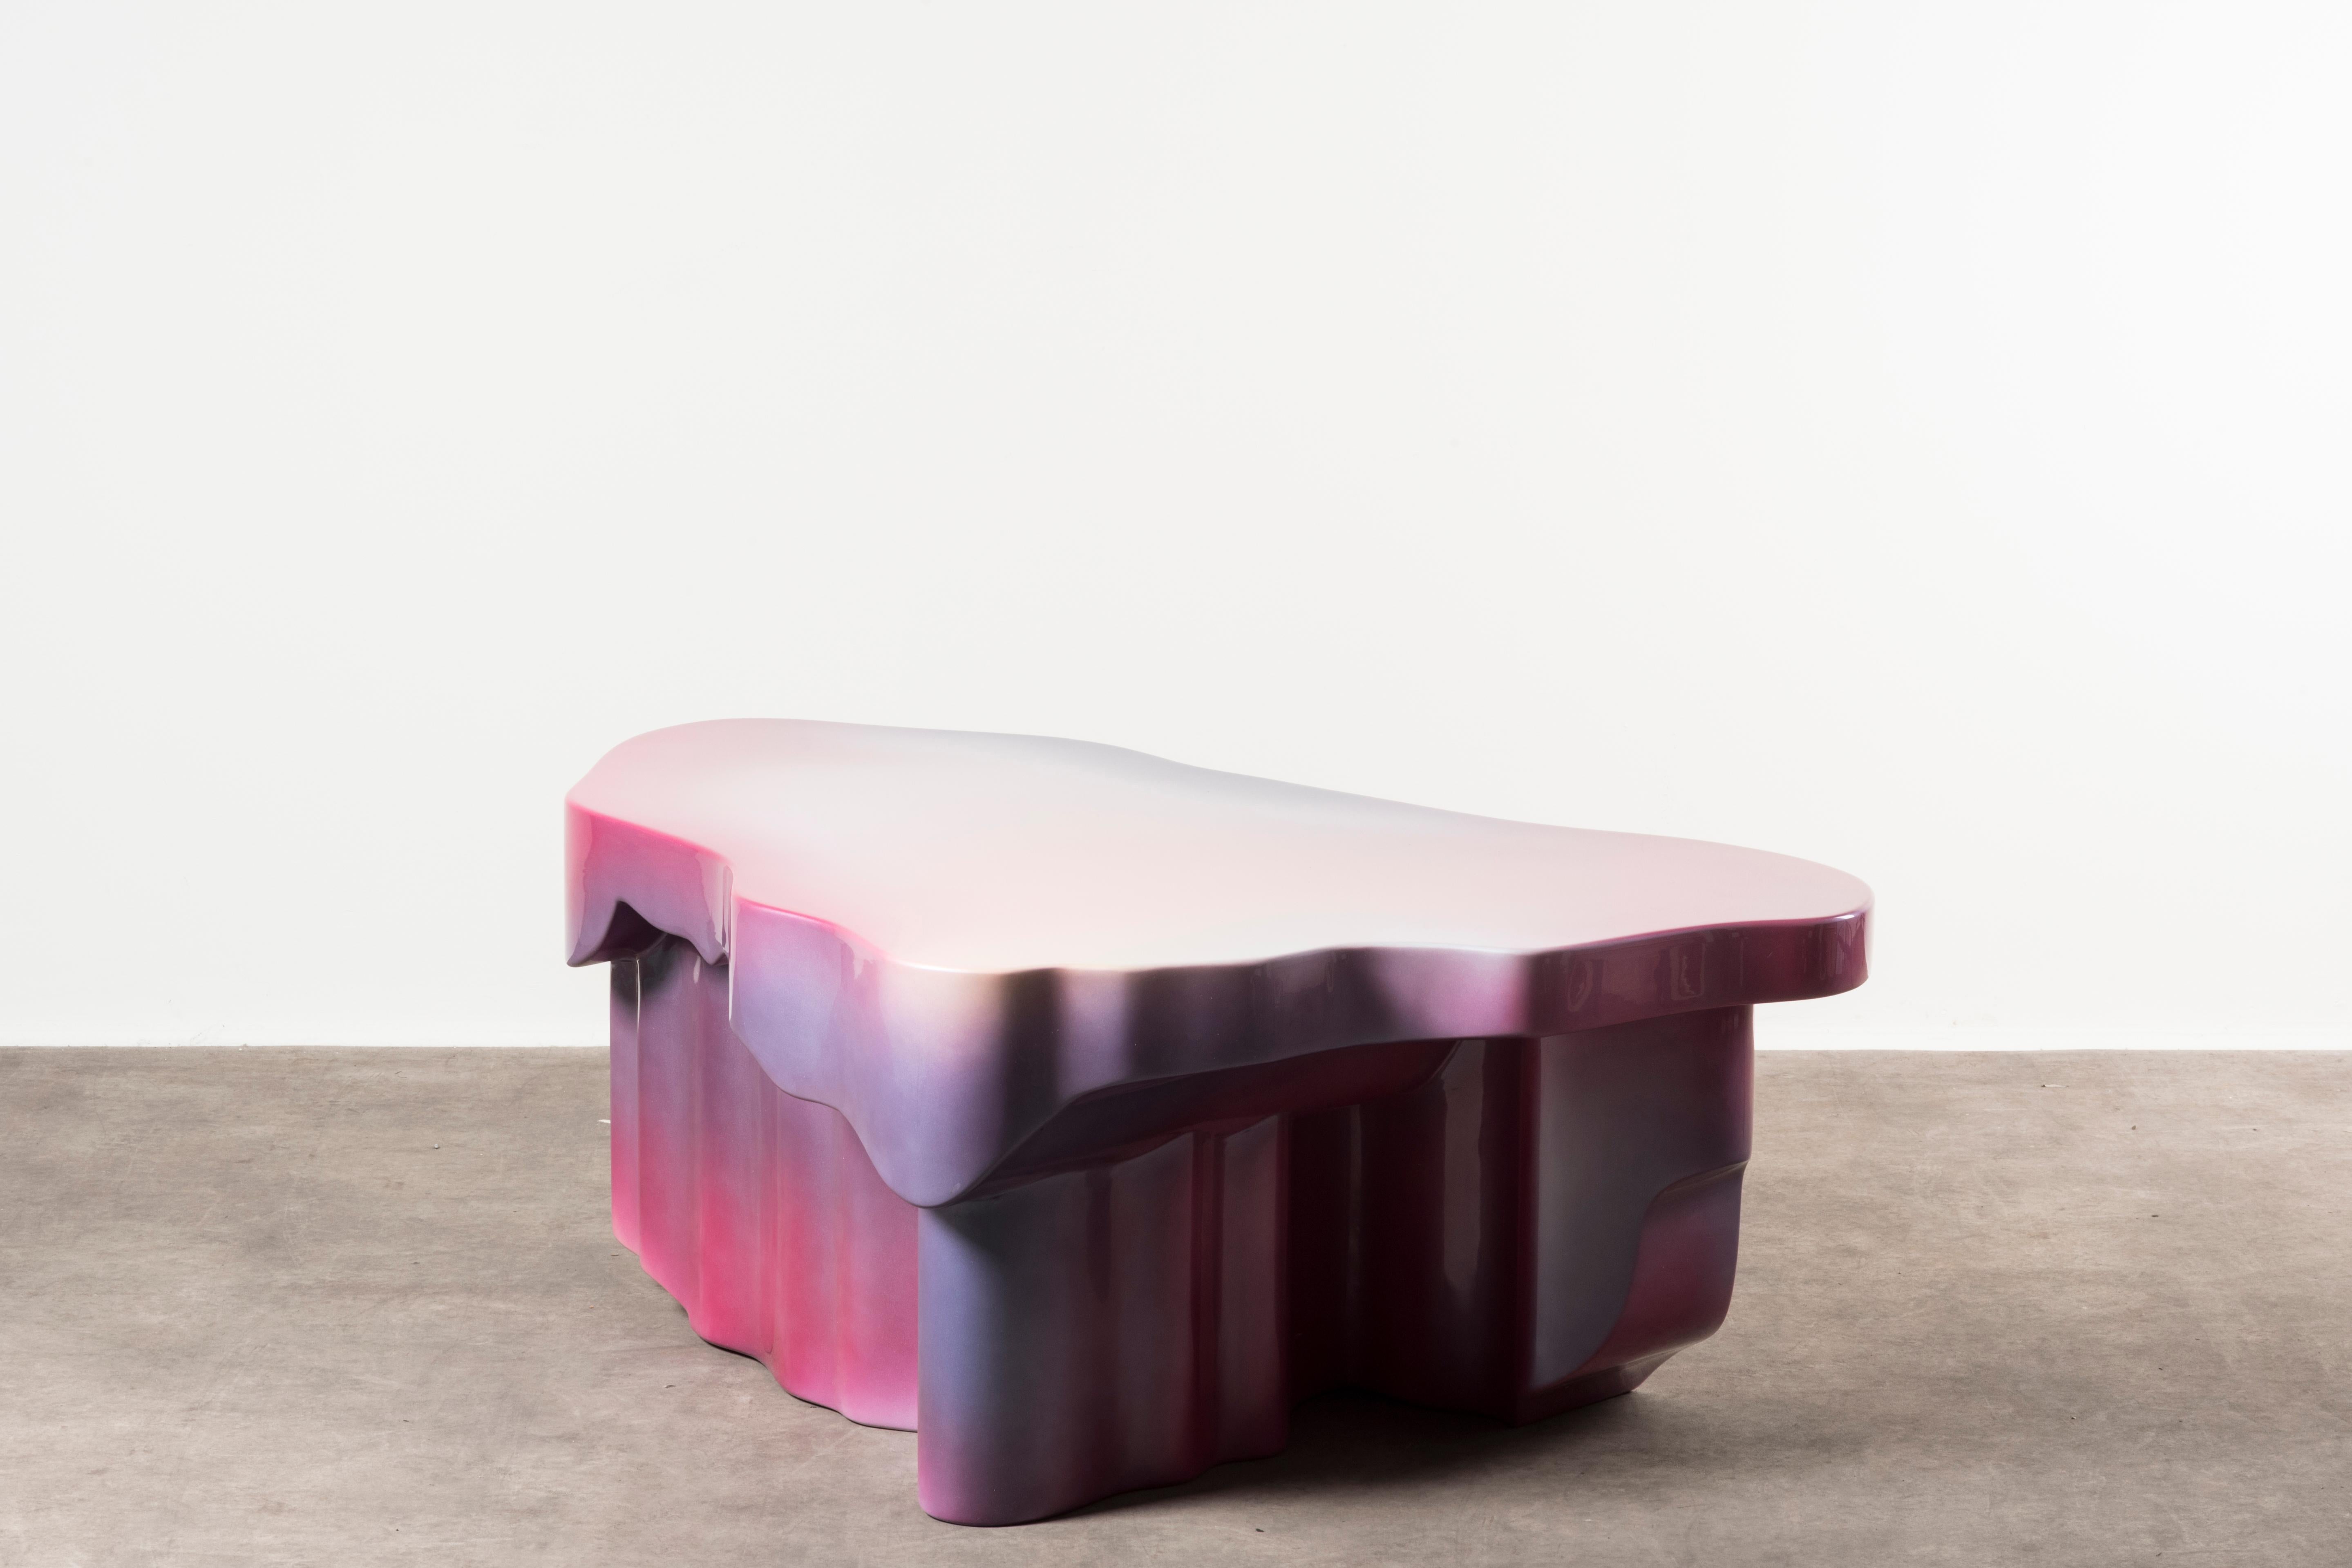 Guise 5 spray coffee table by Odd Matter, the Netherlands, 2018. Nilufar edition. EPS foam, spray. Measures: 123 x 80 x H 45 cm, 48.4 x 31.5 x H 17.7 in. Guise explores the first encounter? Through the potential of spray painting. Surfaces protect